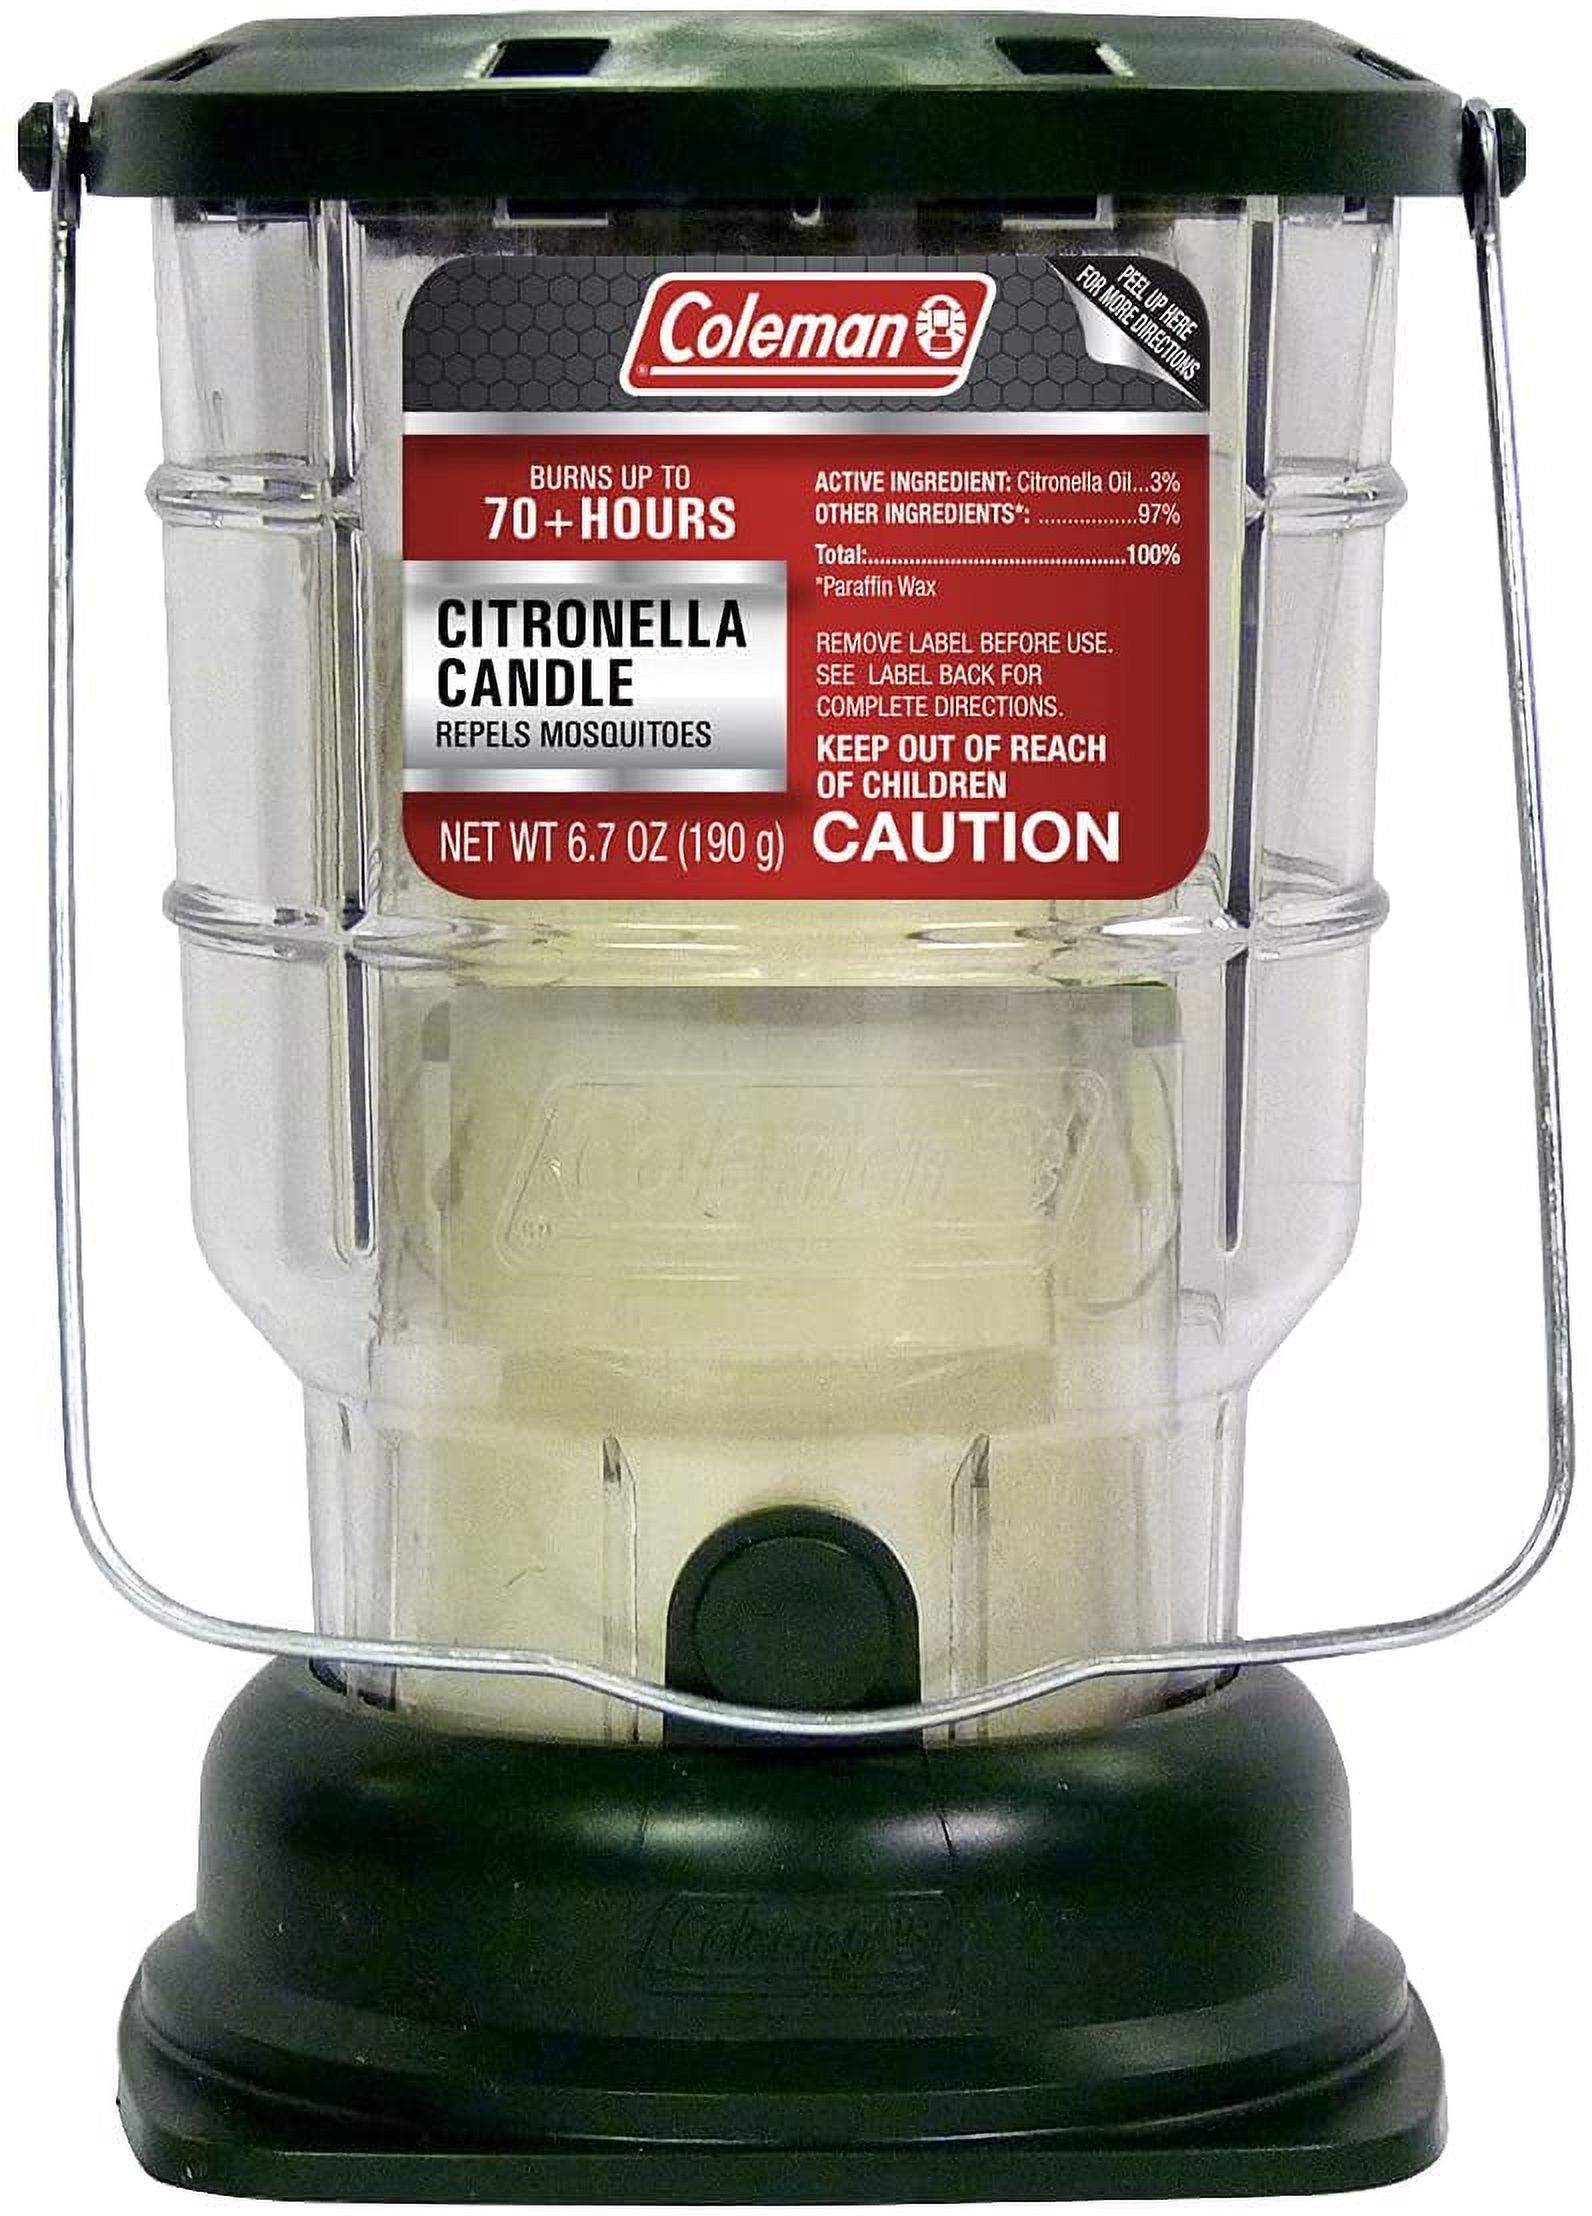 Coleman Citronella Candle Outdoor Lantern - 70+ Hours, 6.7 Ounce, Green - image 7 of 7